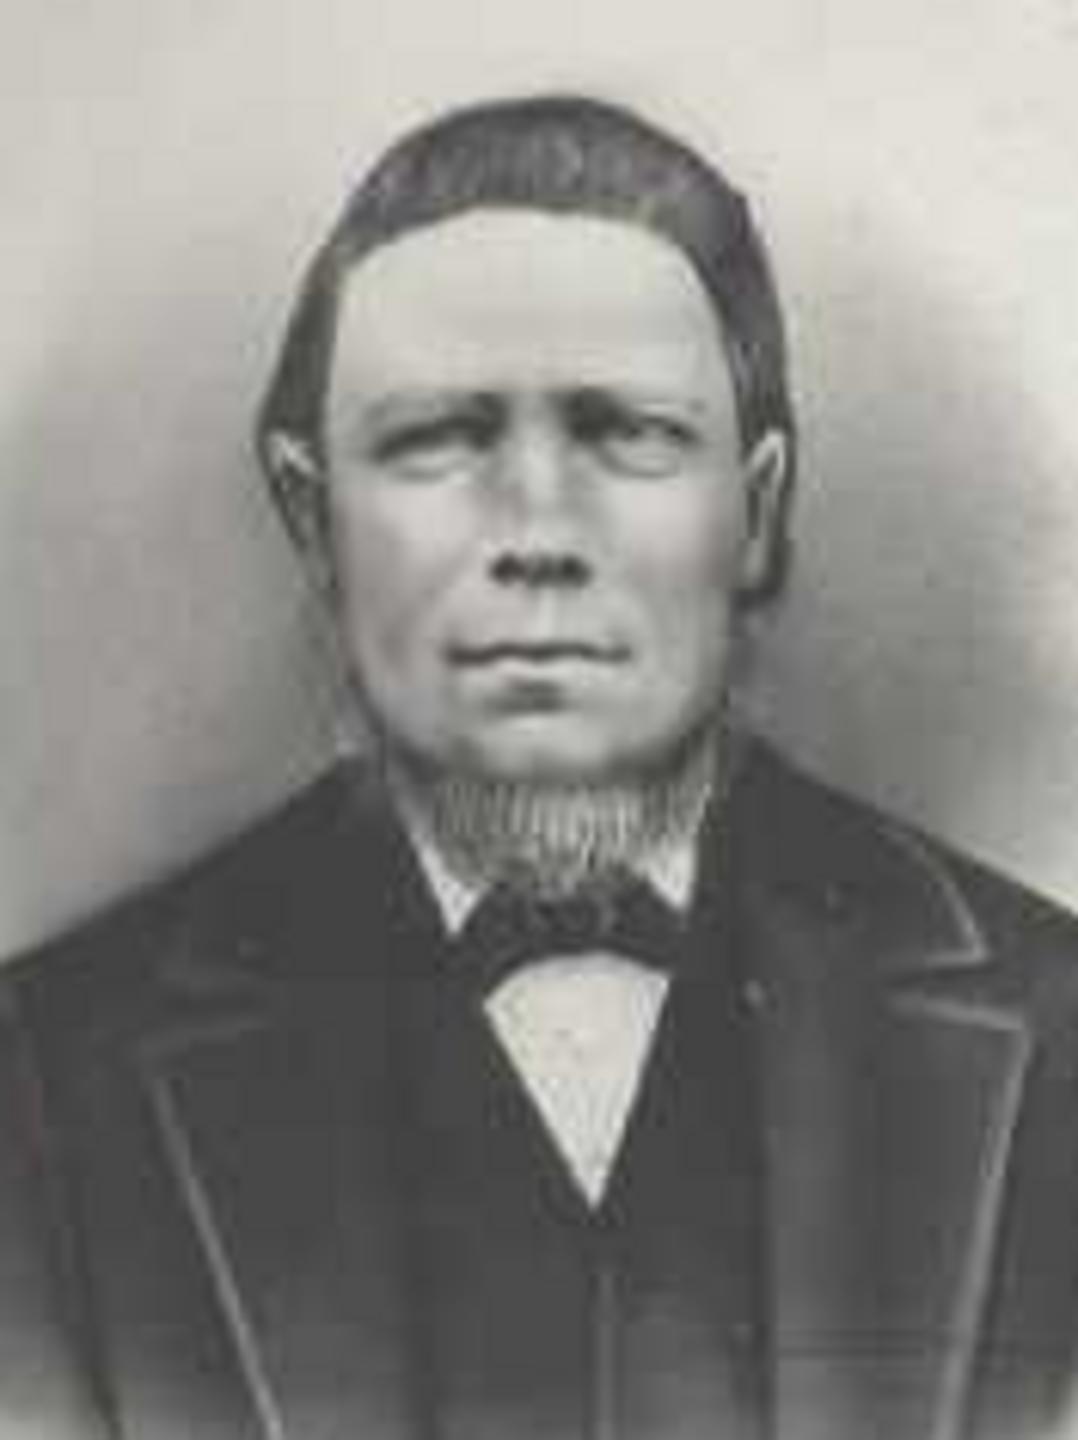 James Holliday Durney (1831 - 1873) Profile